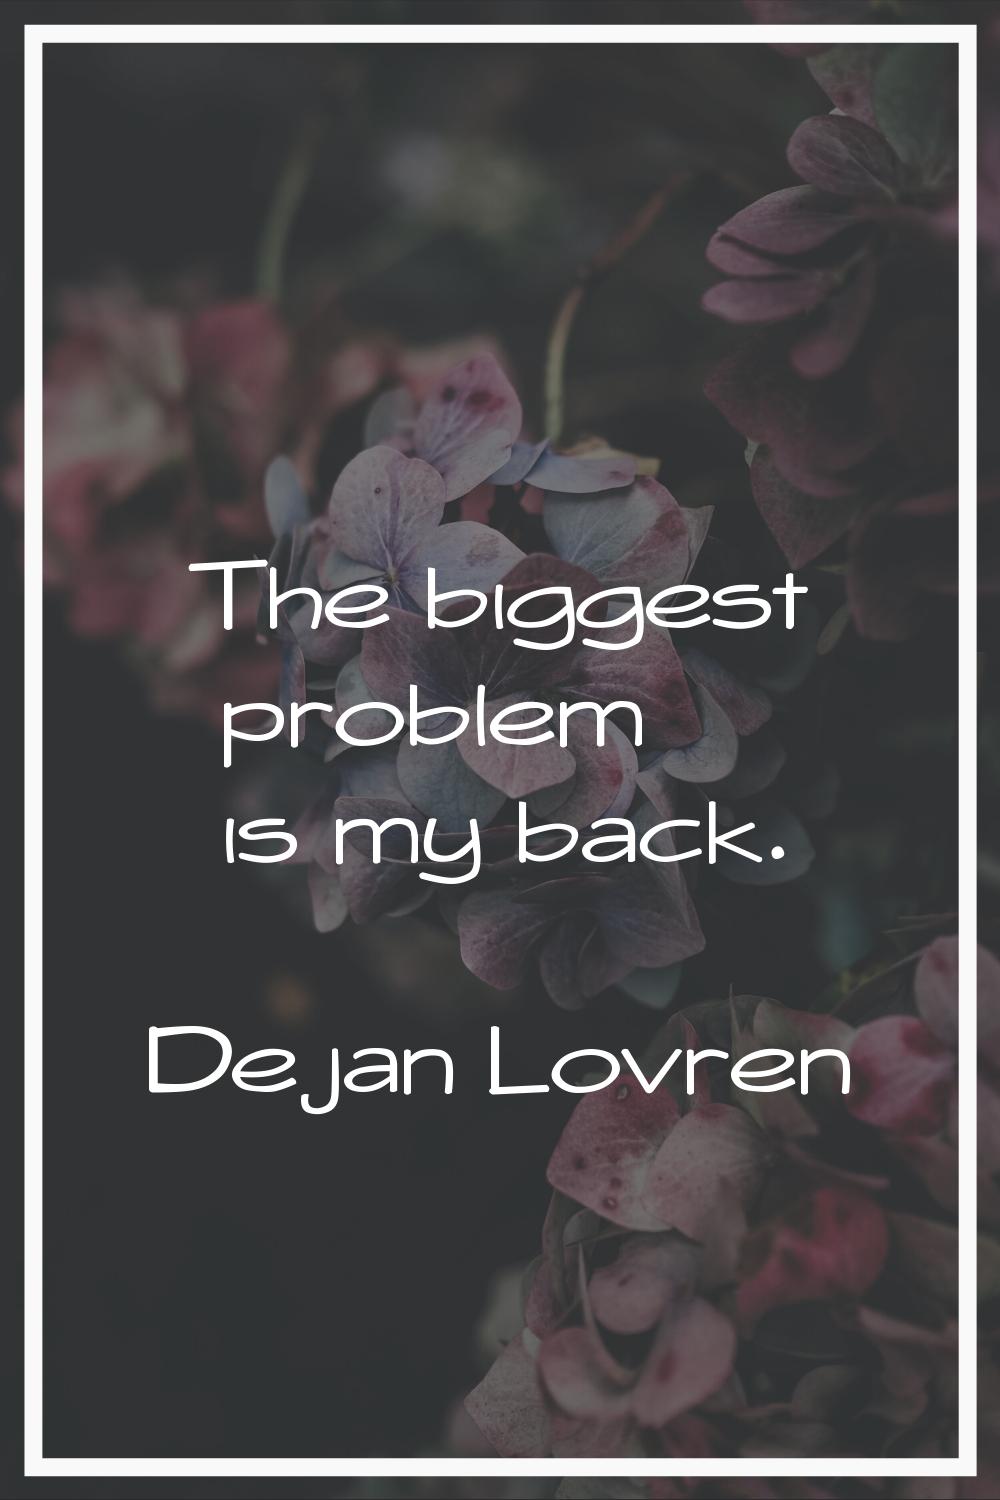 The biggest problem is my back.